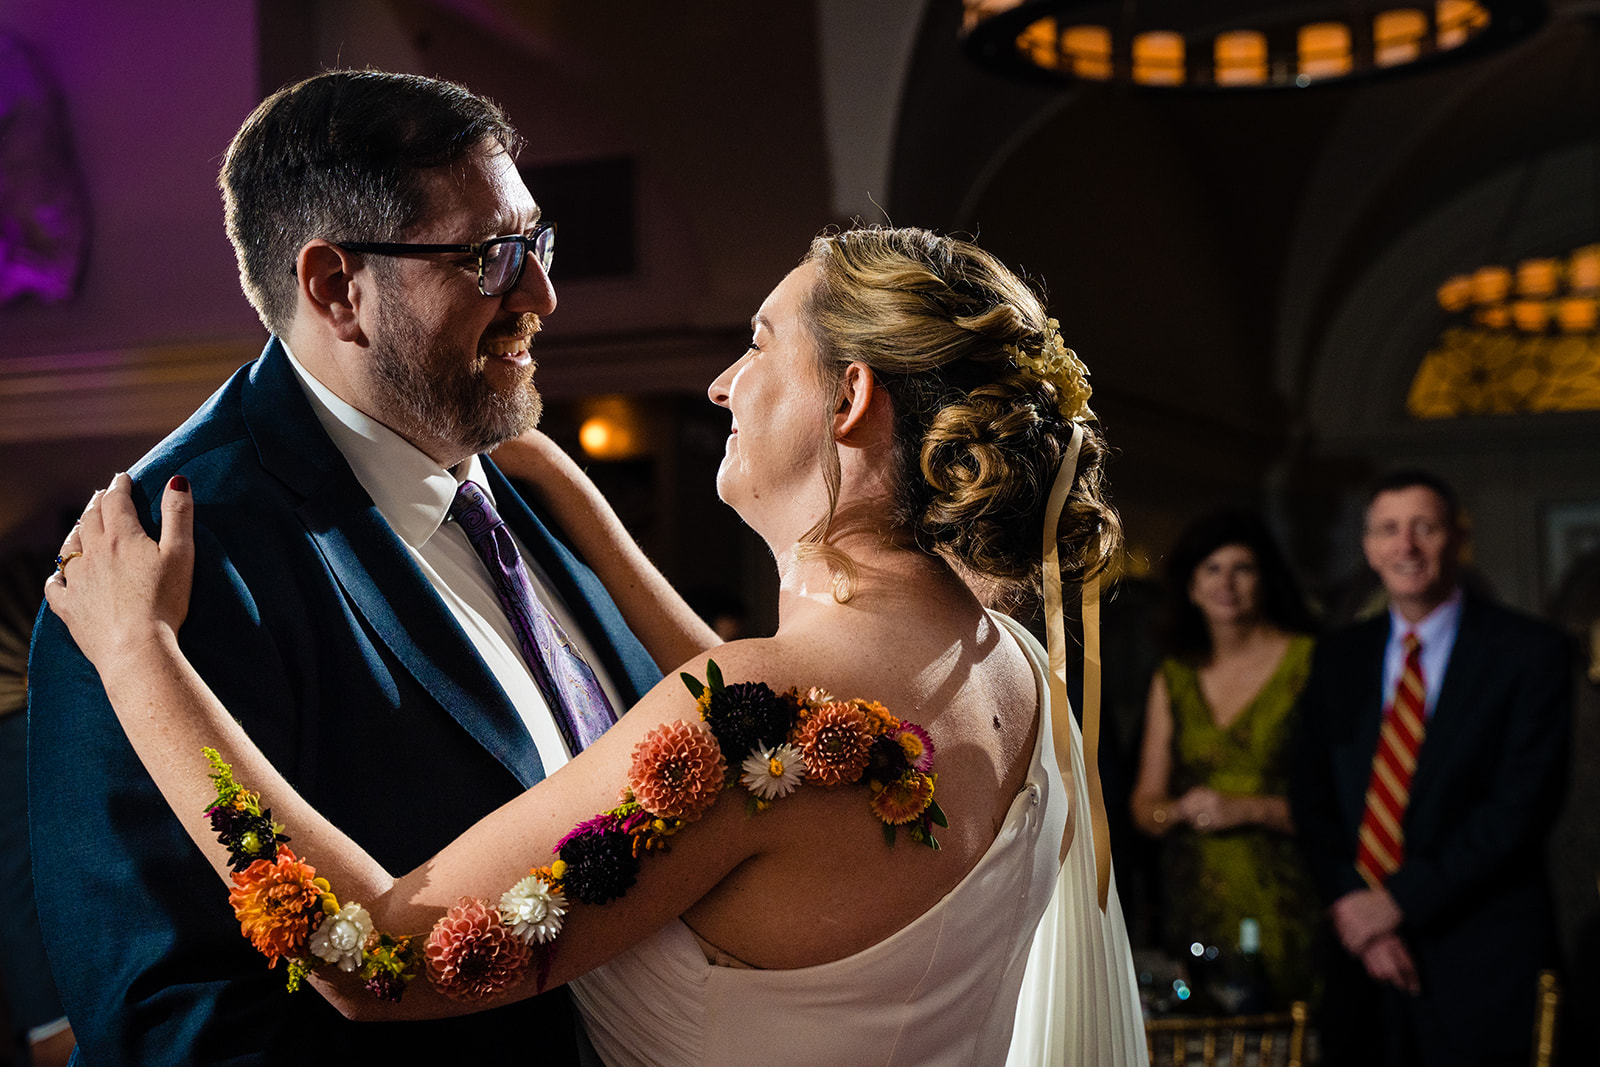 Bride and groom's first dance at their wedding reception at Hotel Monaco in Washington DC by Potok's World Photography